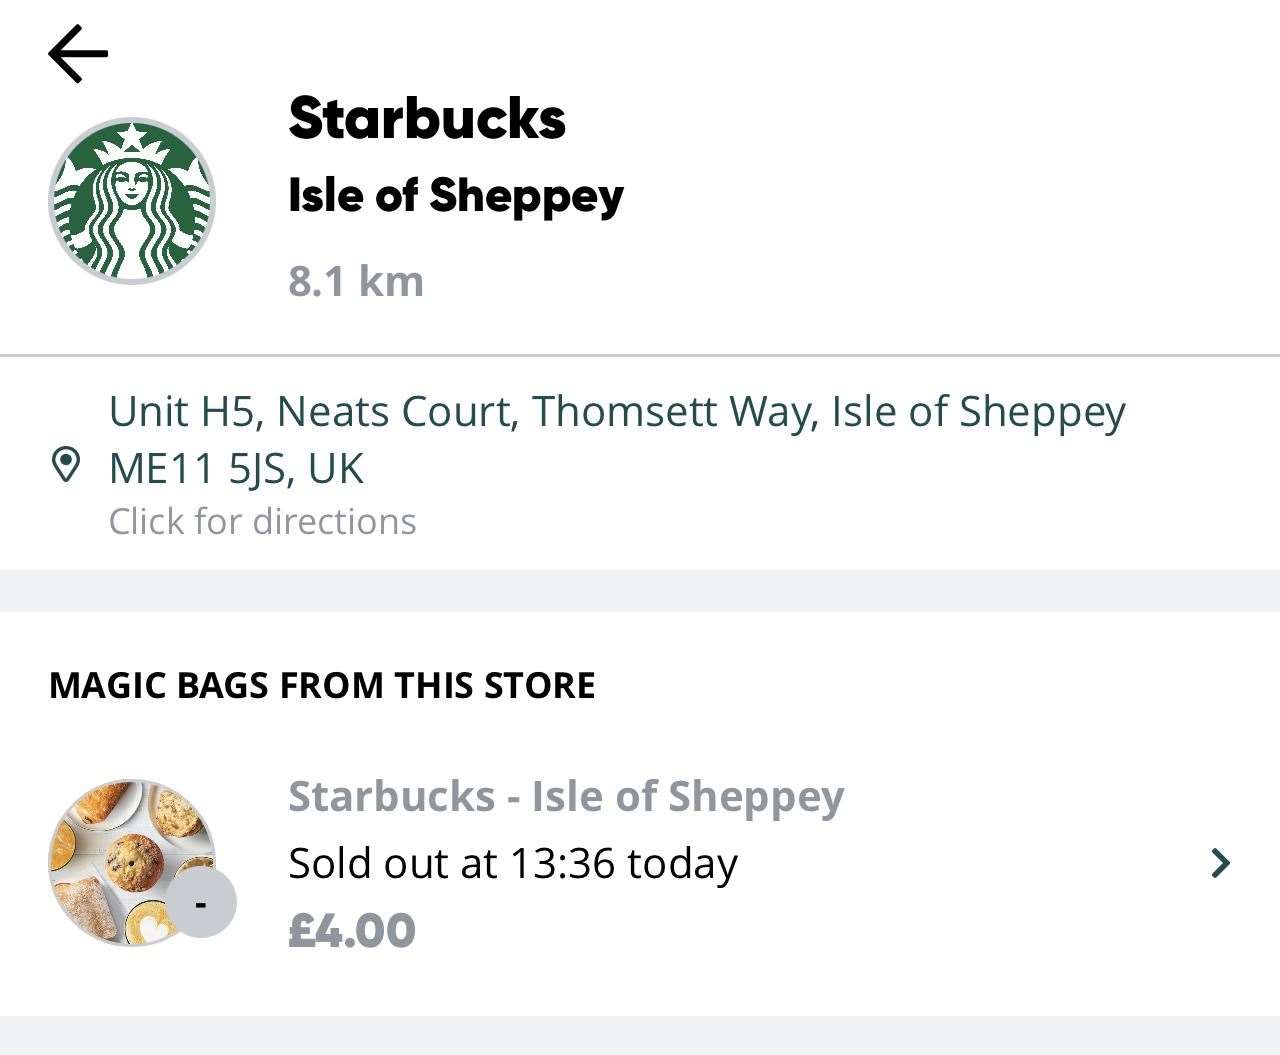 The Starbucks offer on The Too Good To Go app